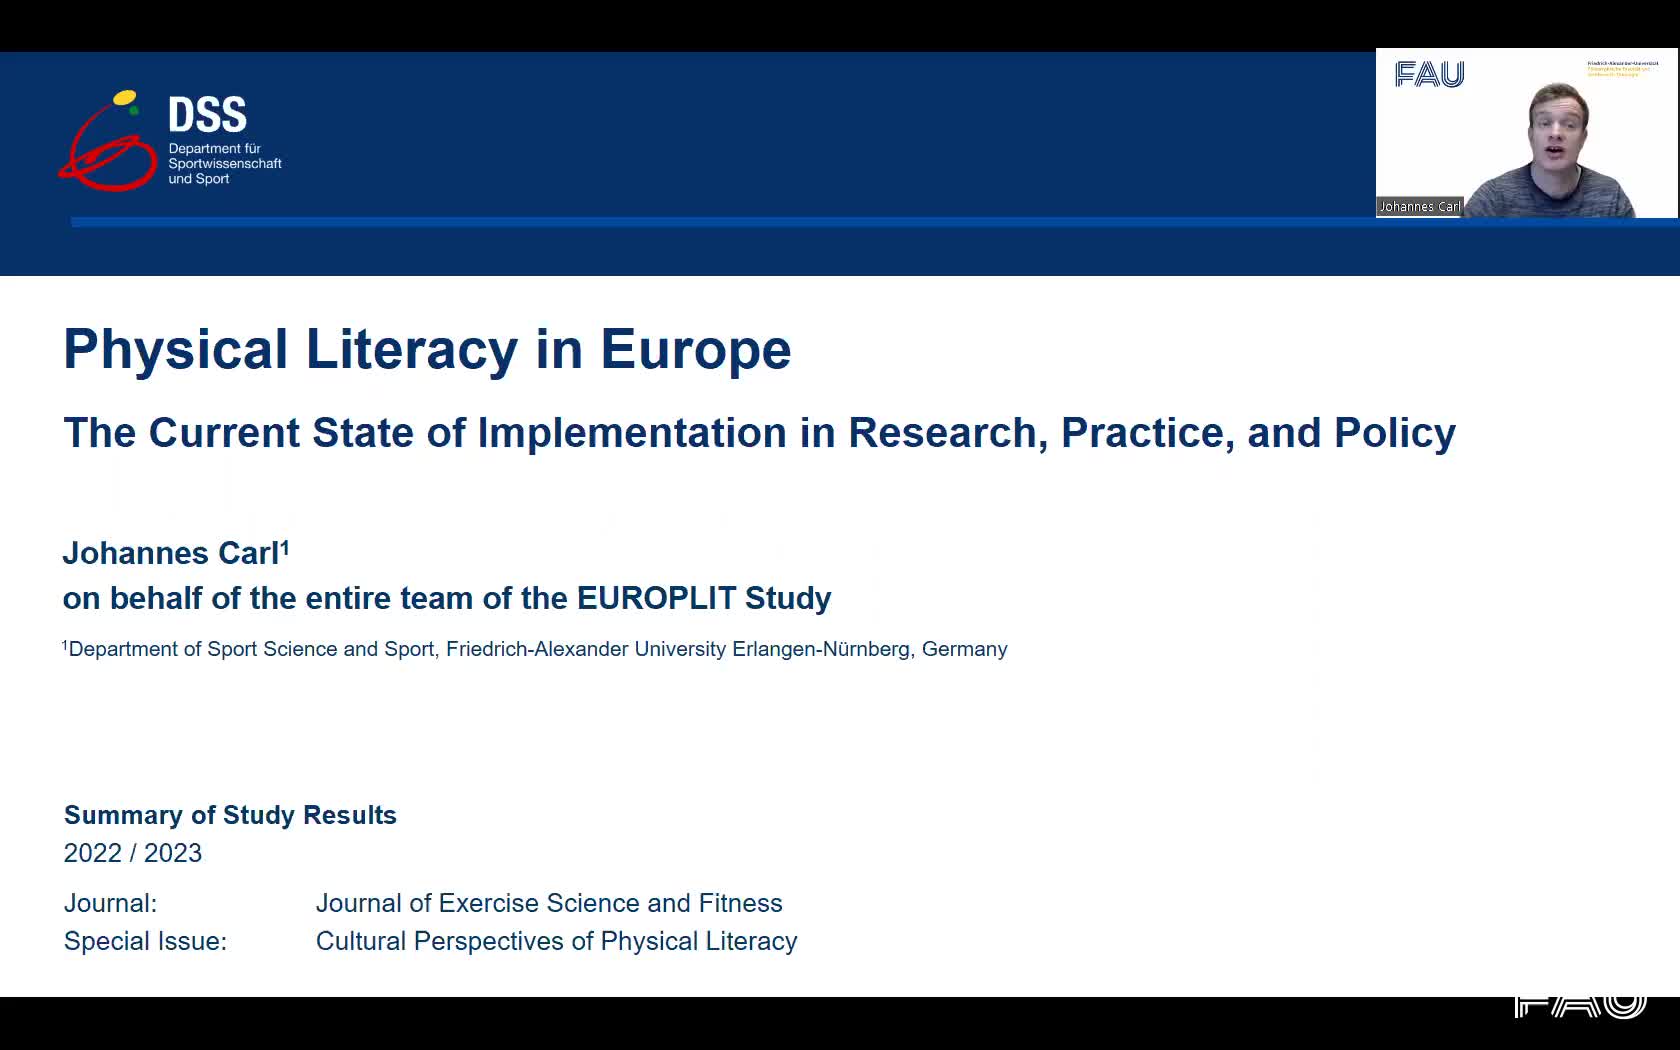 The Current Status of Physical Literacy in Europe (Short Summary) preview image